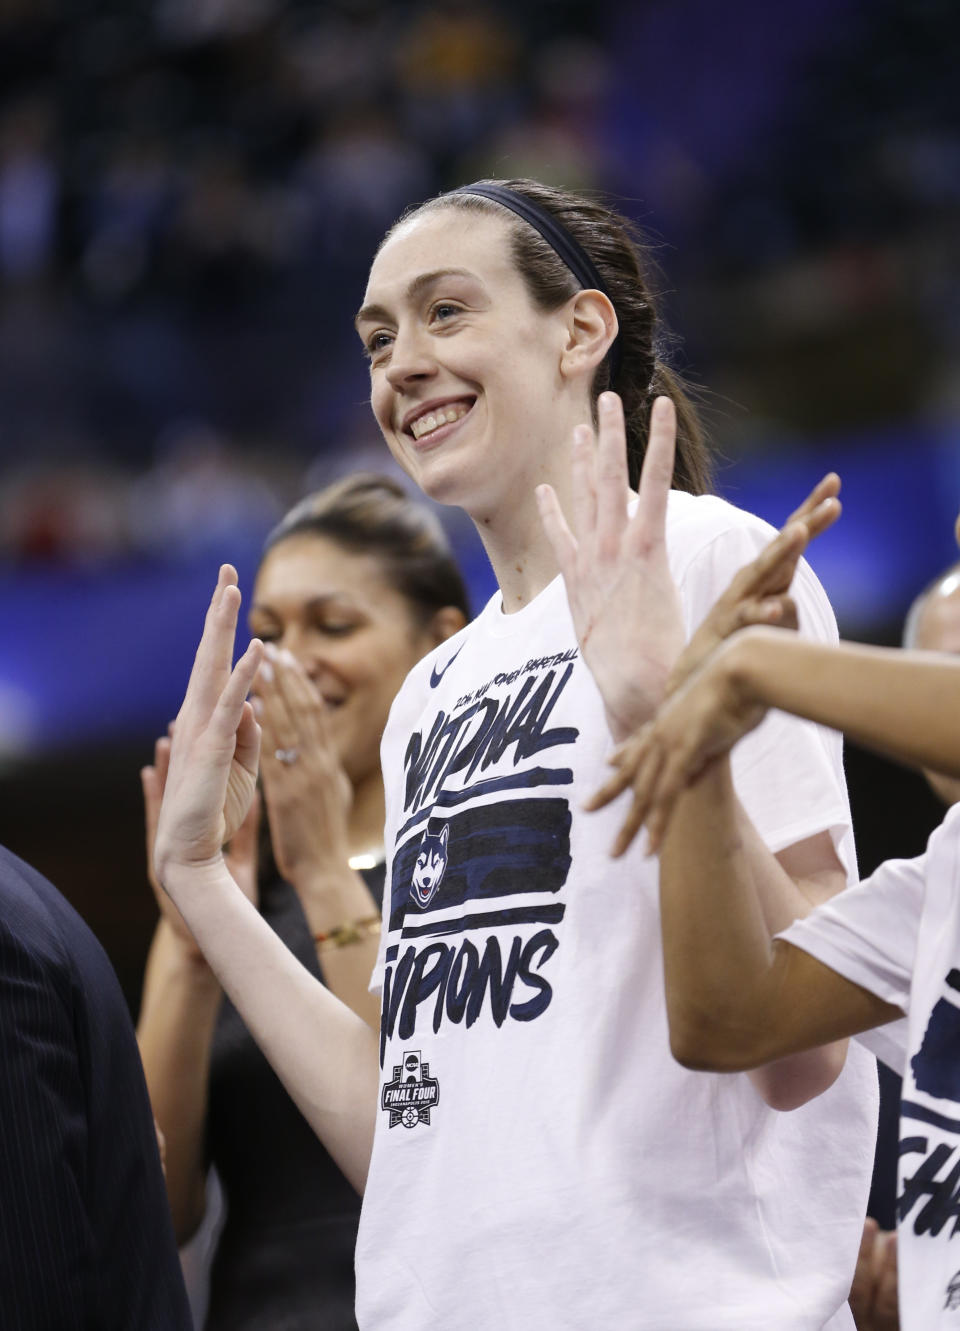 FILE - Connecticut's Breanna Stewart celebrates after Connecticut's 82-51 victory over Syracuse in the championship game at the women's Final Four in the NCAA college basketball tournament Tuesday, April 5, 2016, in Indianapolis. Iowa's Caitlin Clark will soon be the NCAA's scoring leader. That's fact and, in many minds, enough to put the 22-year-old star high up among the greats of college basketball. (AP Photo/AJ Mast, File)